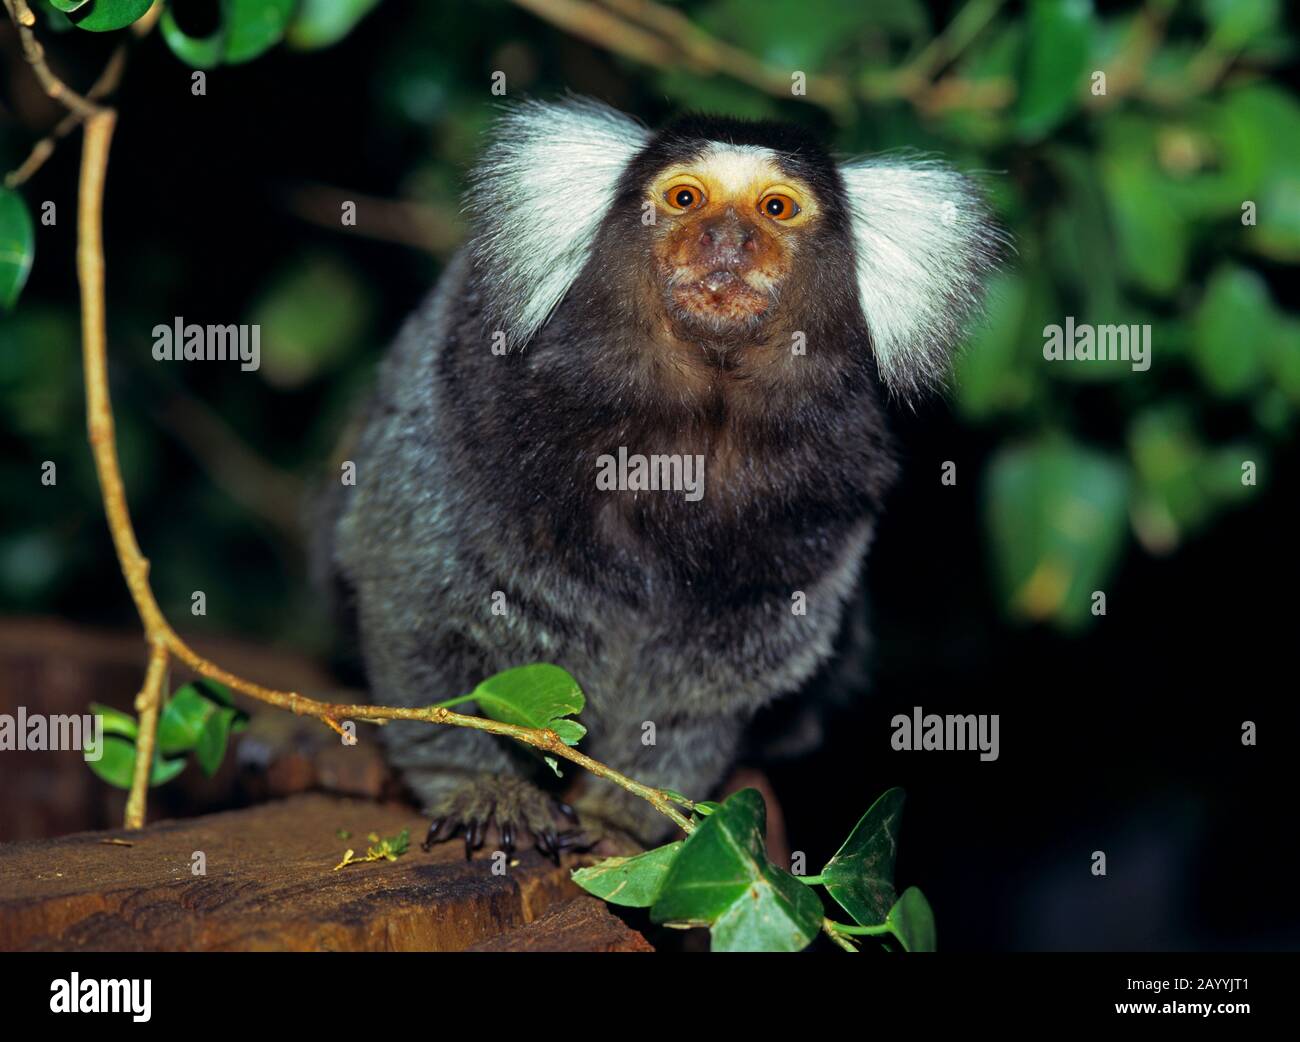 common marmoset (Callithrix jacchus), looking into the camera Stock Photo